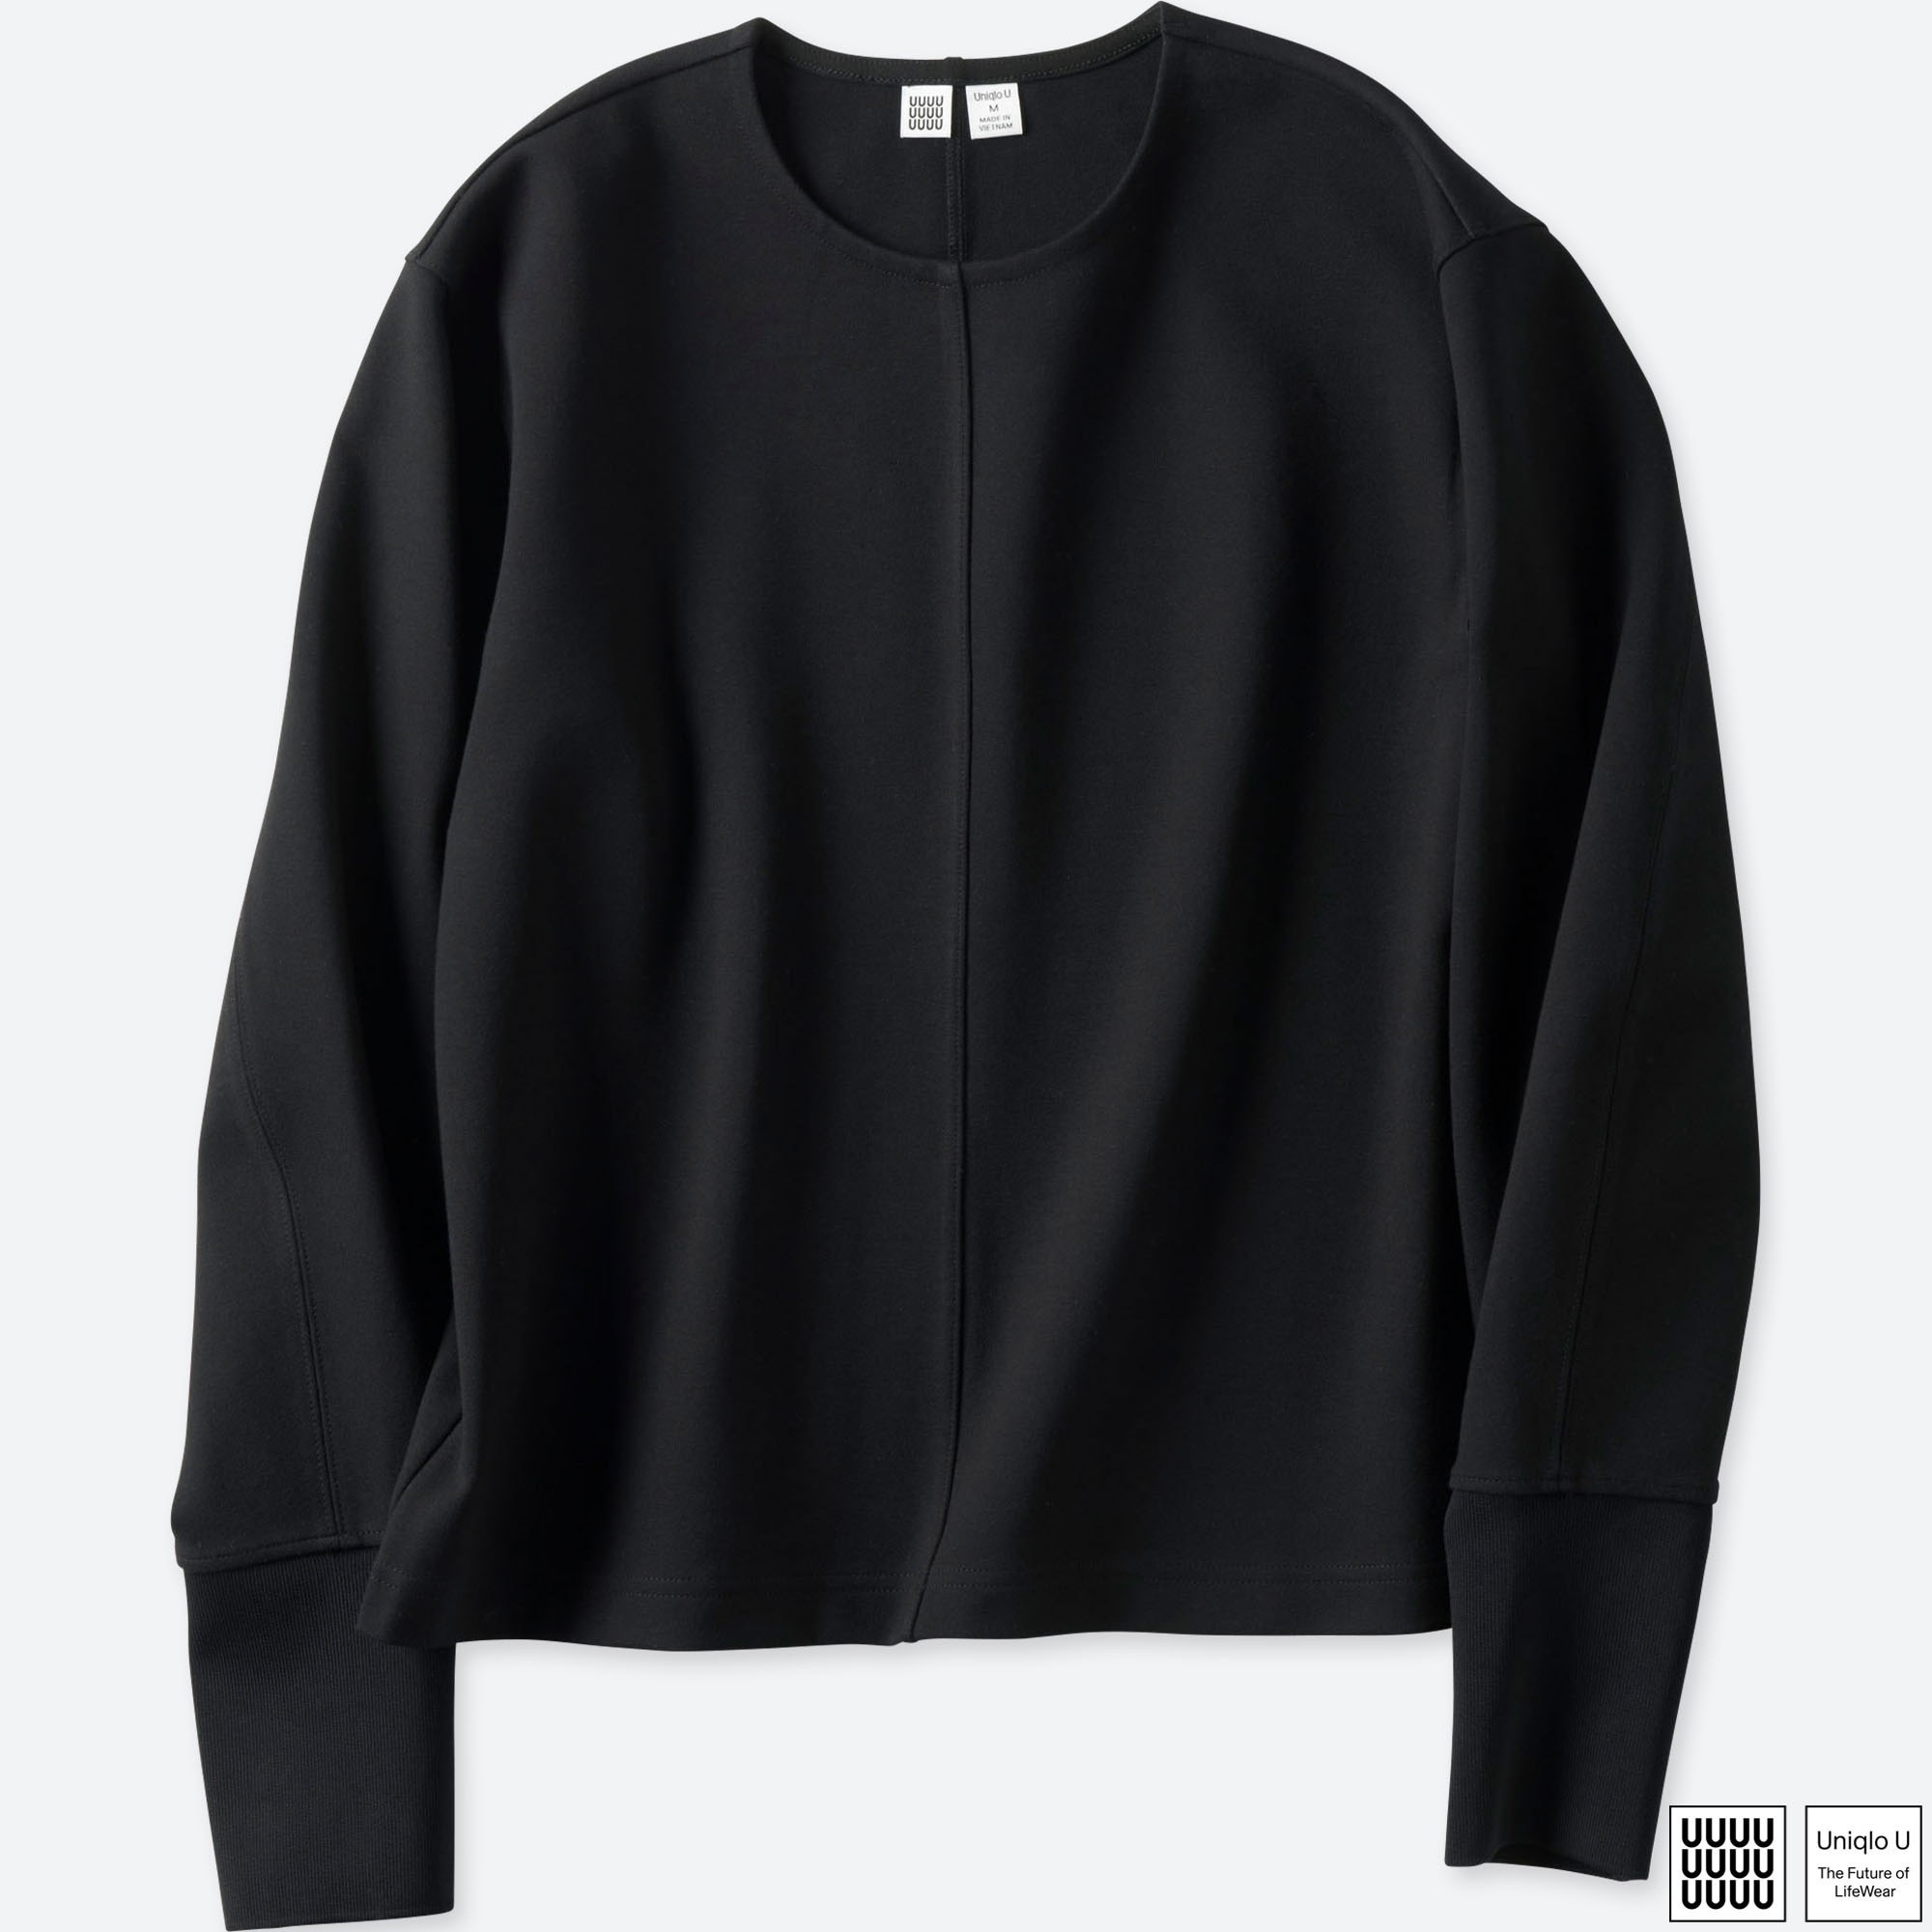 For uniqlo u long sleeve t shirt queen street used